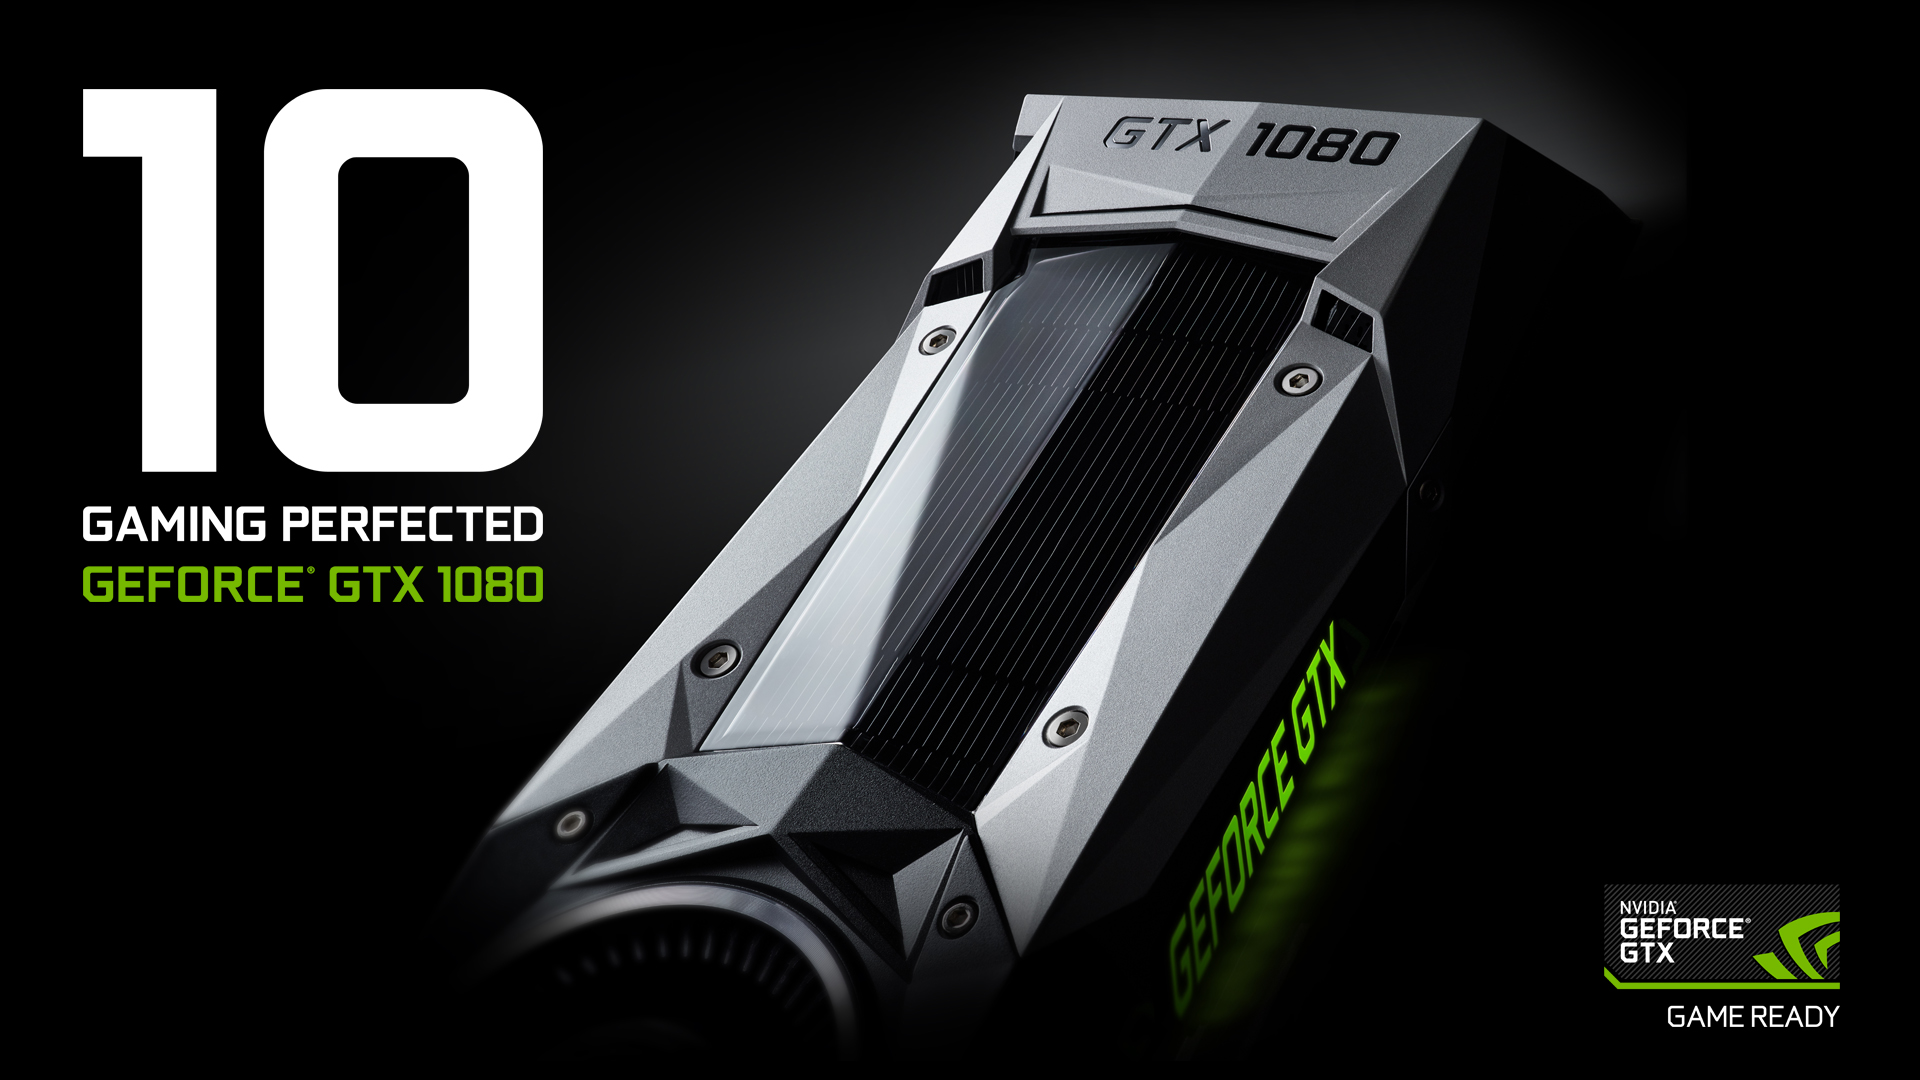 Introducing The GeForce GTX 1080: Gaming Perfected GeForce News | NVIDIA